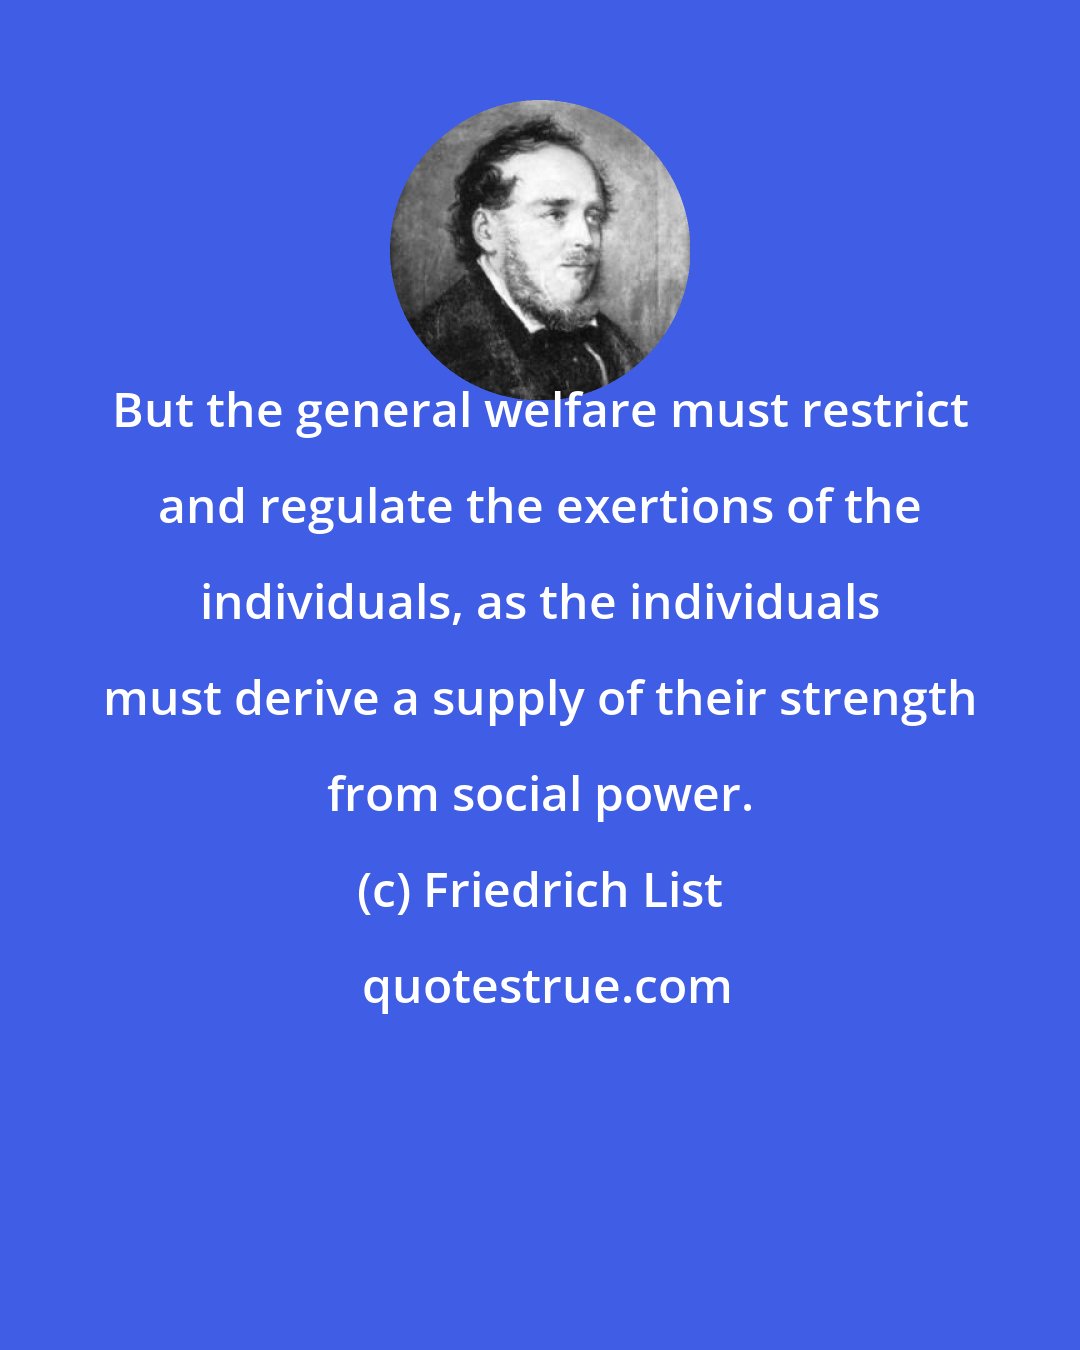 Friedrich List: But the general welfare must restrict and regulate the exertions of the individuals, as the individuals must derive a supply of their strength from social power.